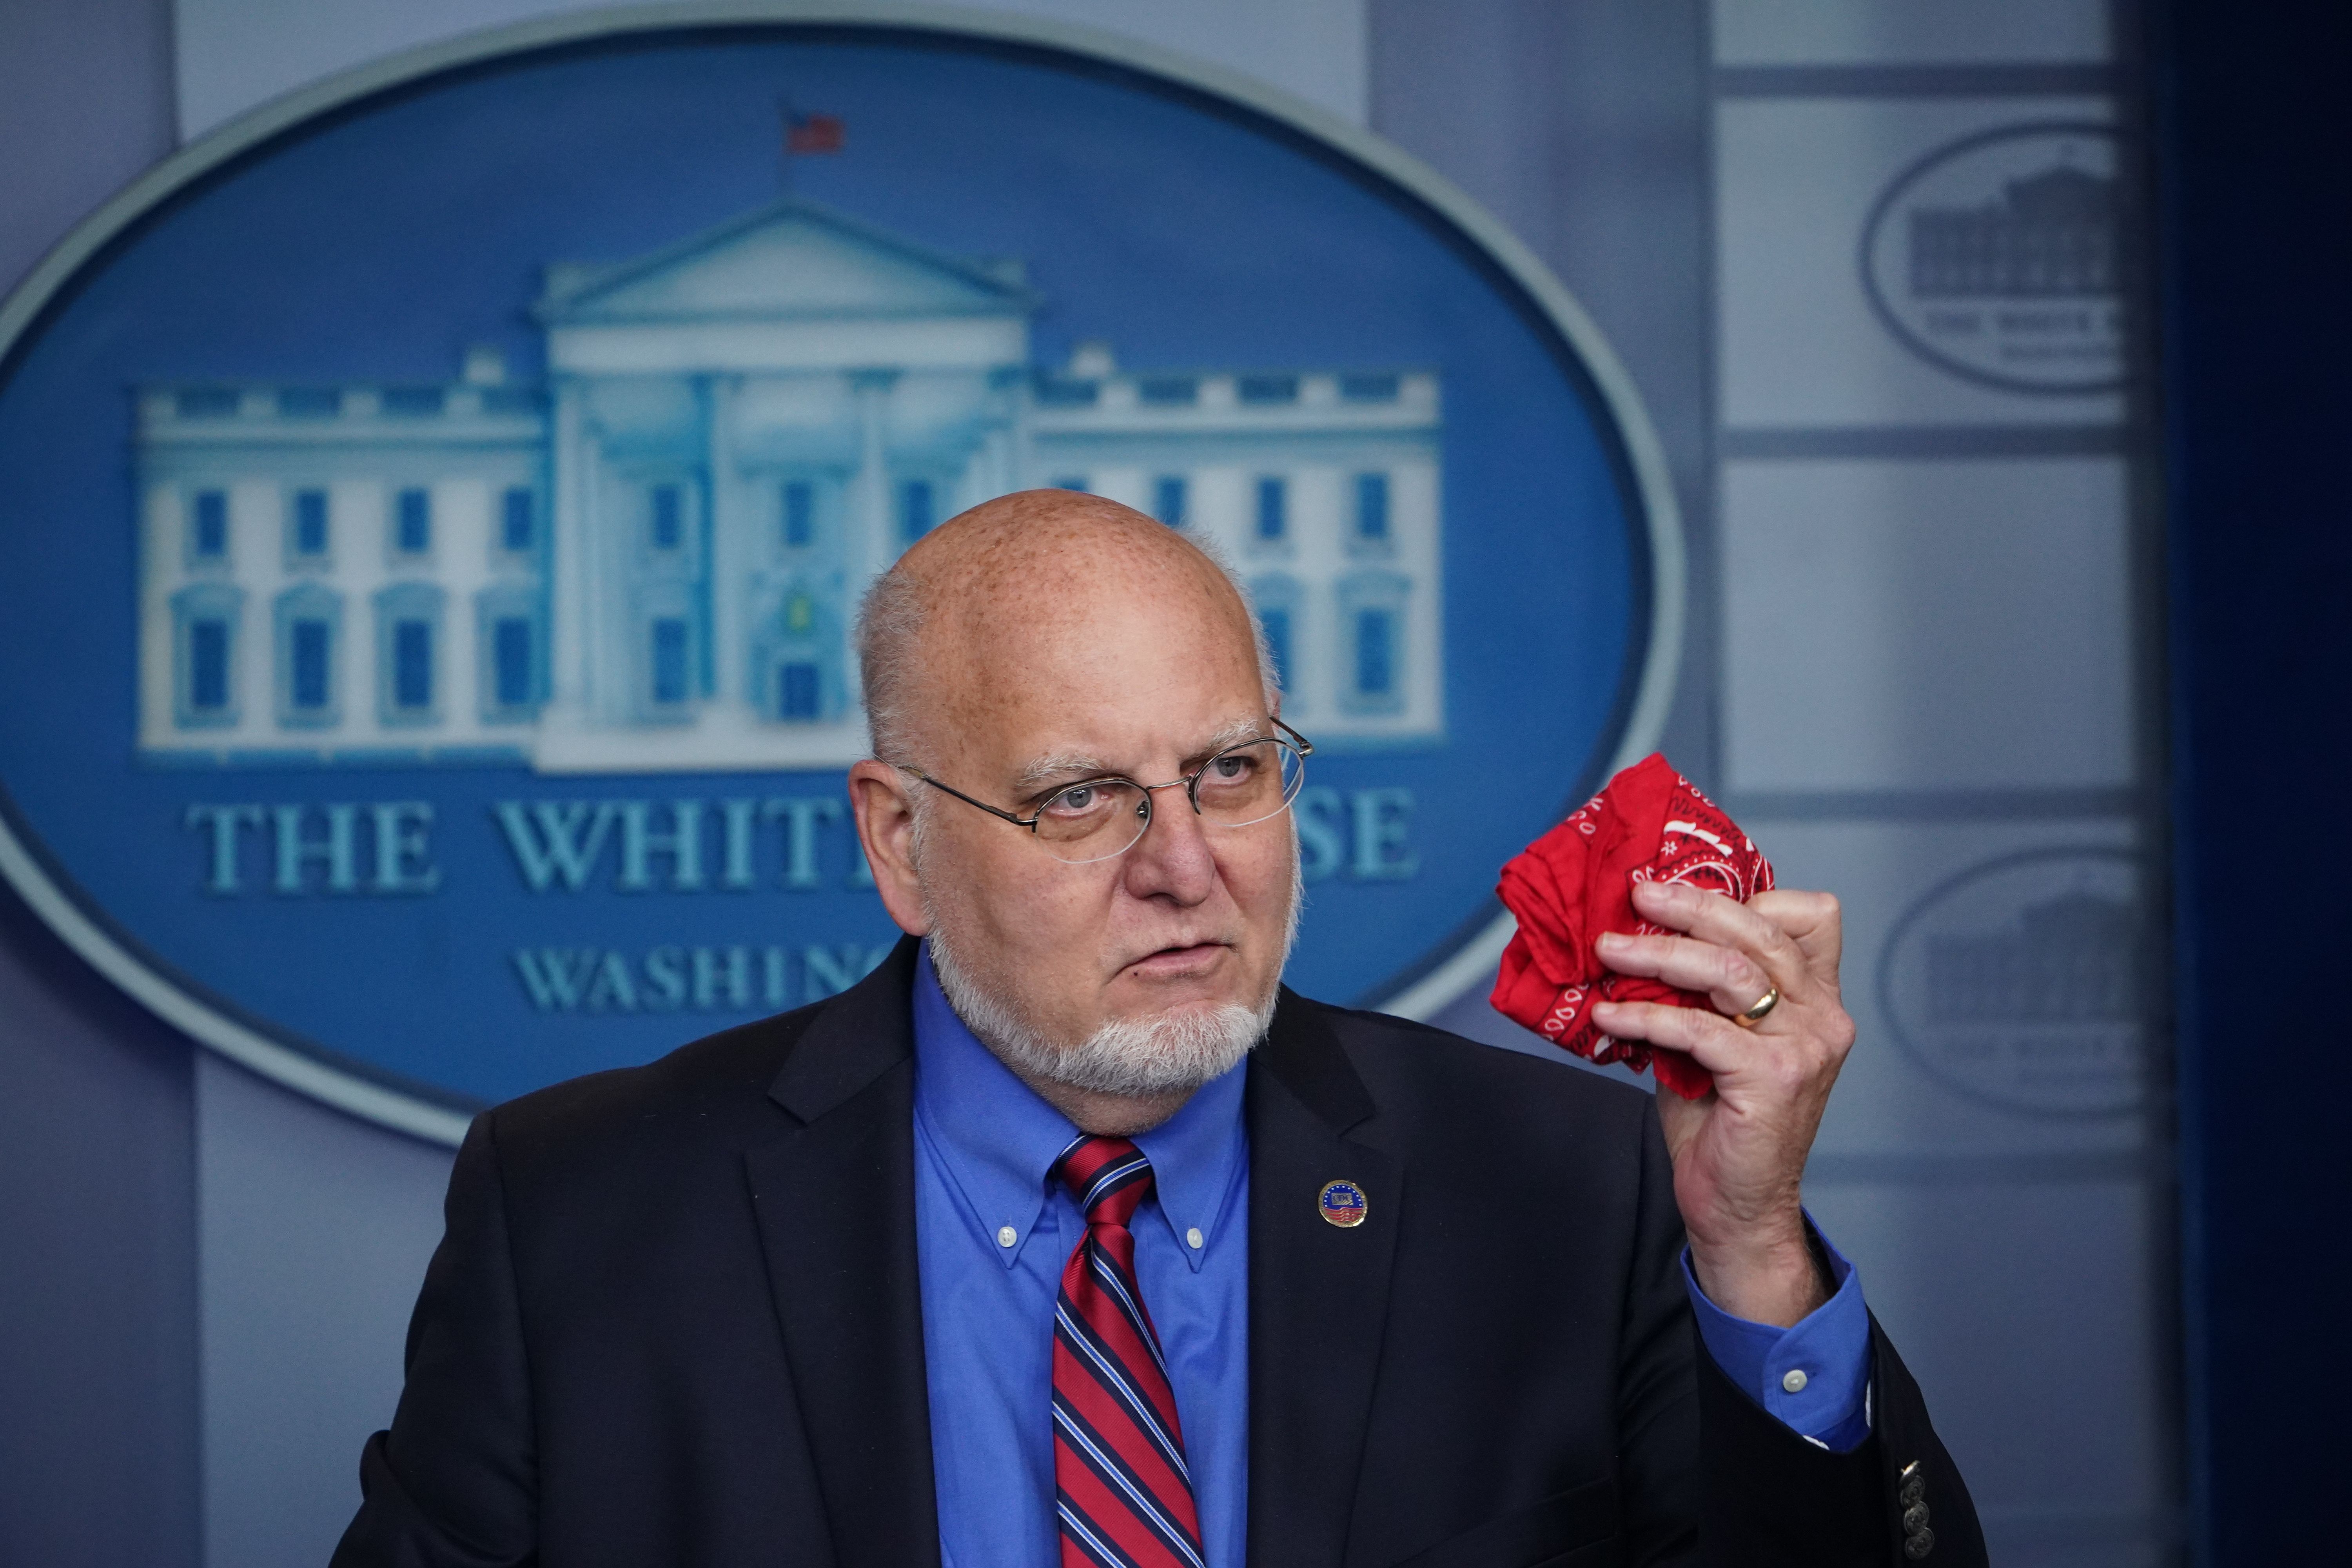 CDC Director Robert R. Redfield speaks during the daily briefing on the novel coronavirus, which causes COVID-19, in the Brady Briefing Room of the White House on April 22, 2020, in Washington, DC. (Photo by MANDEL NGAN/AFP via Getty Images)